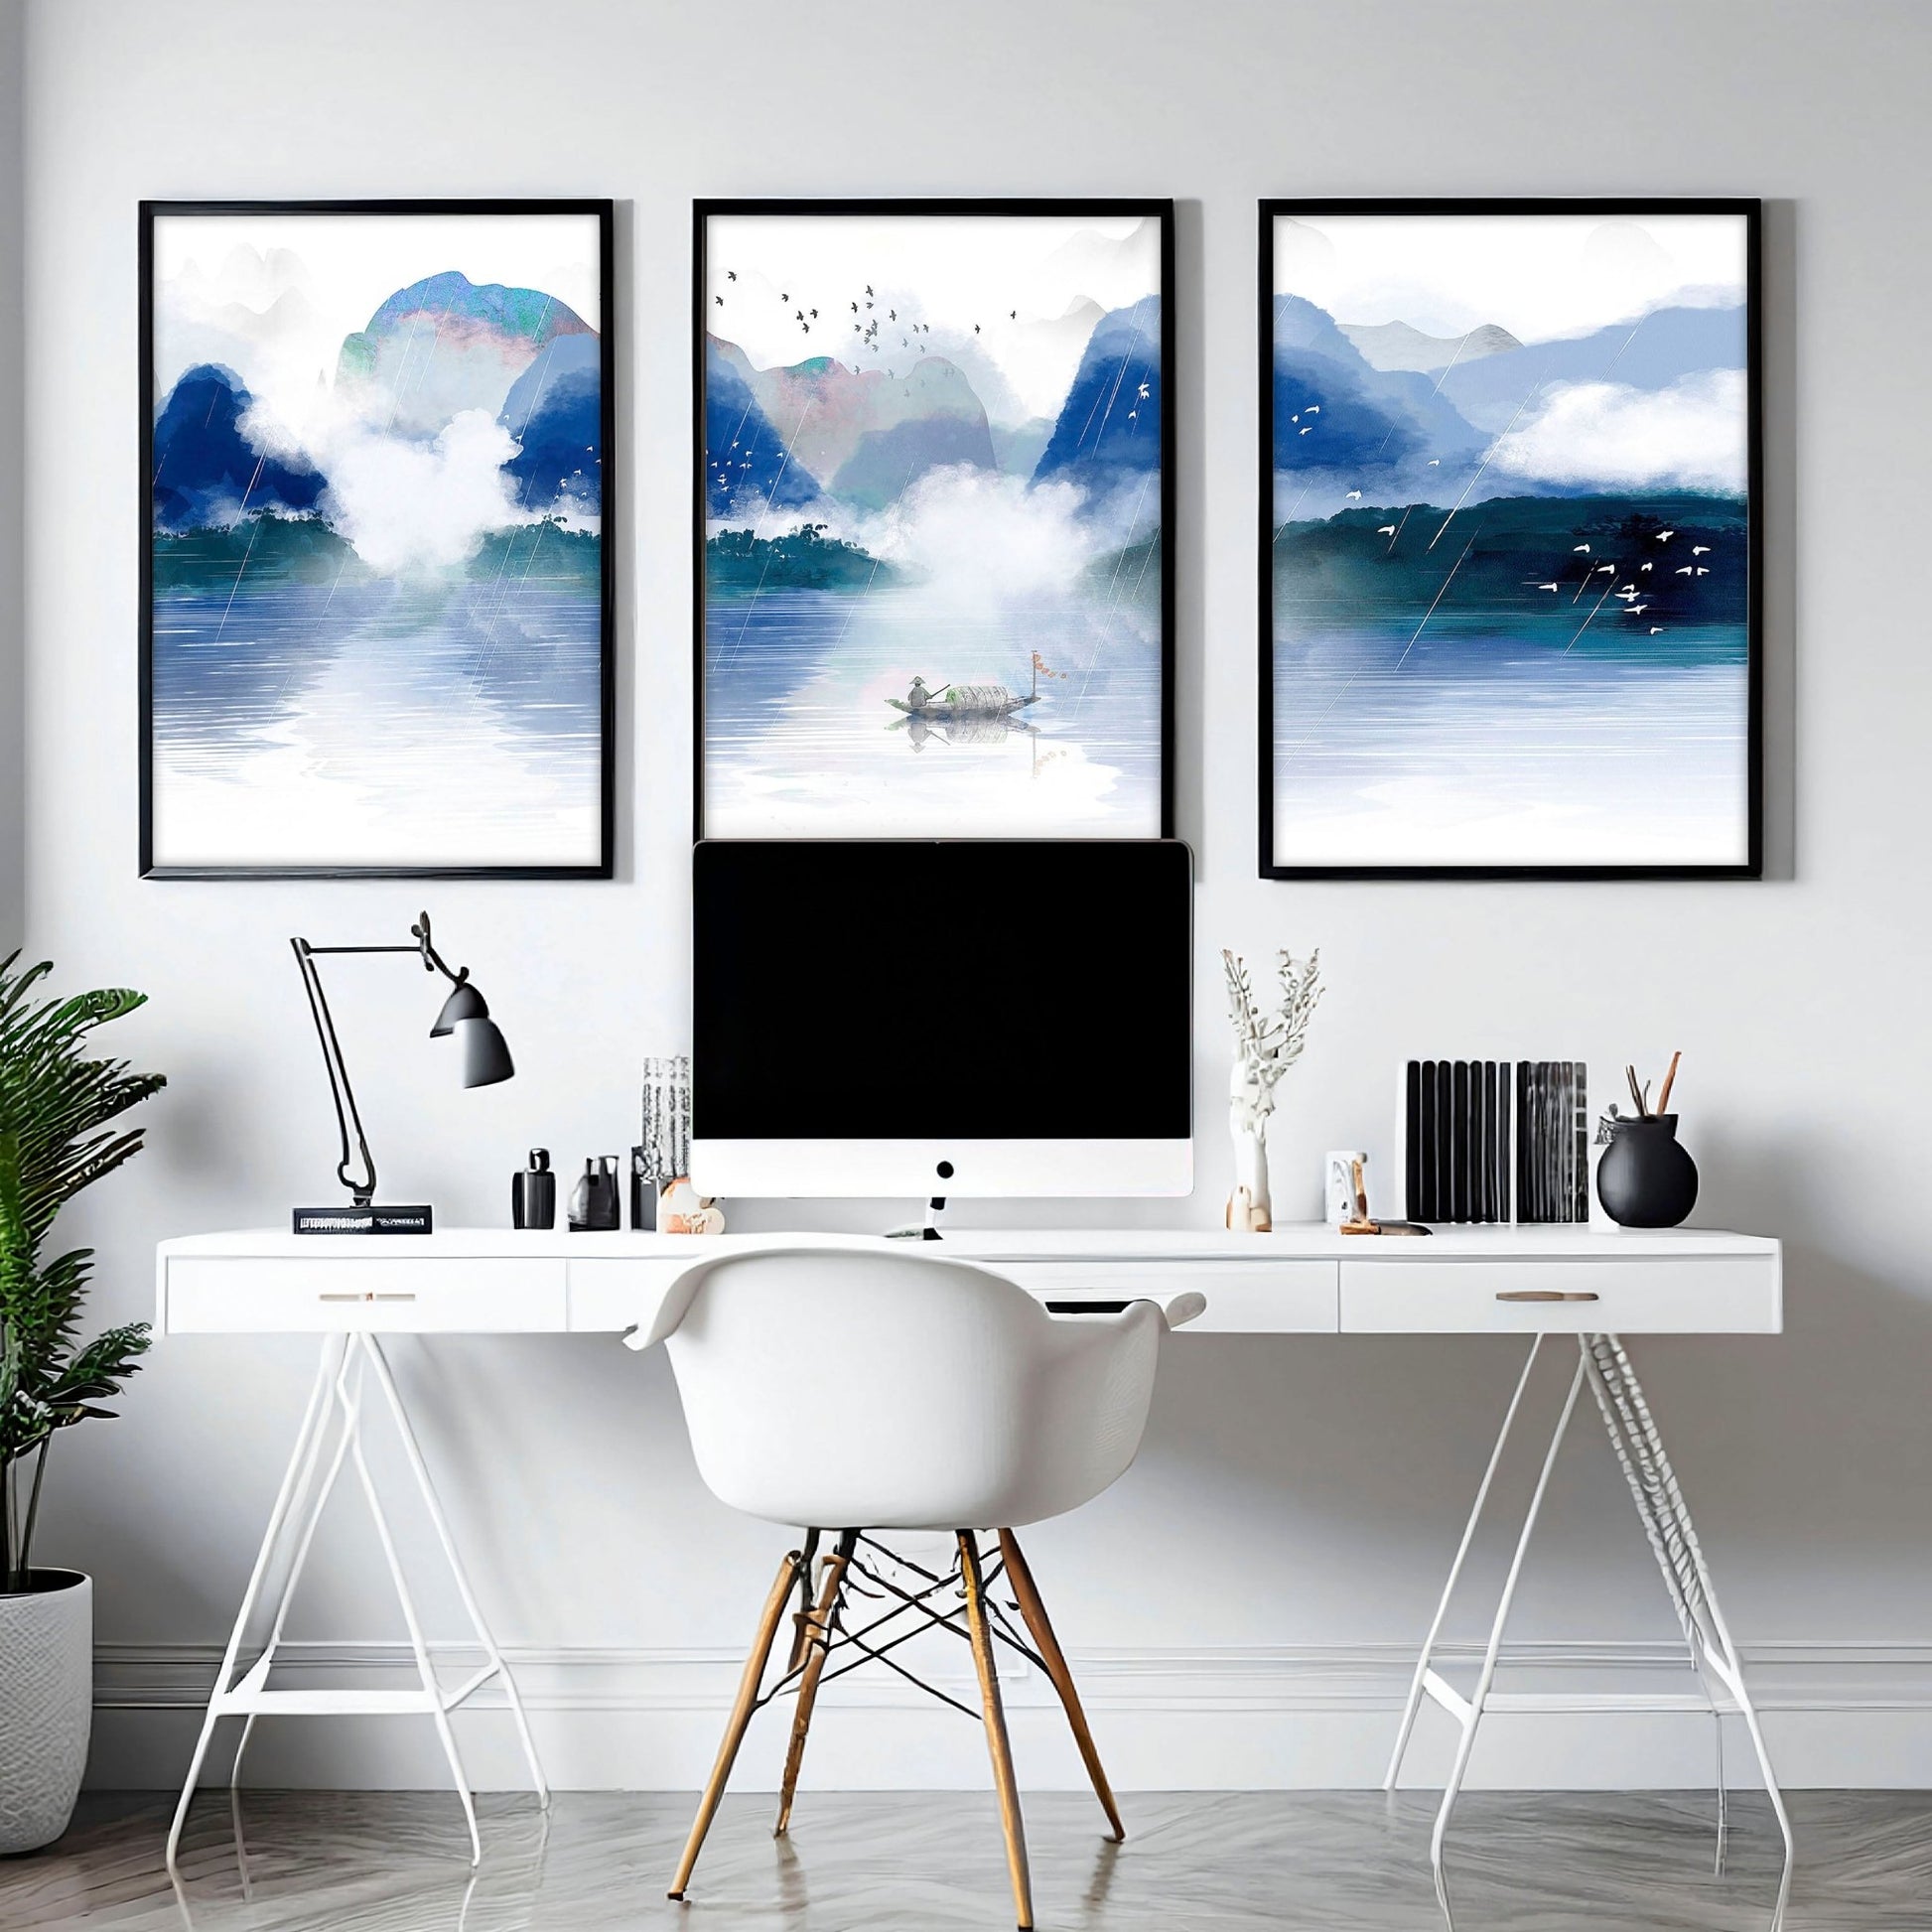 Wall decorations office | set of 3 wall art prints